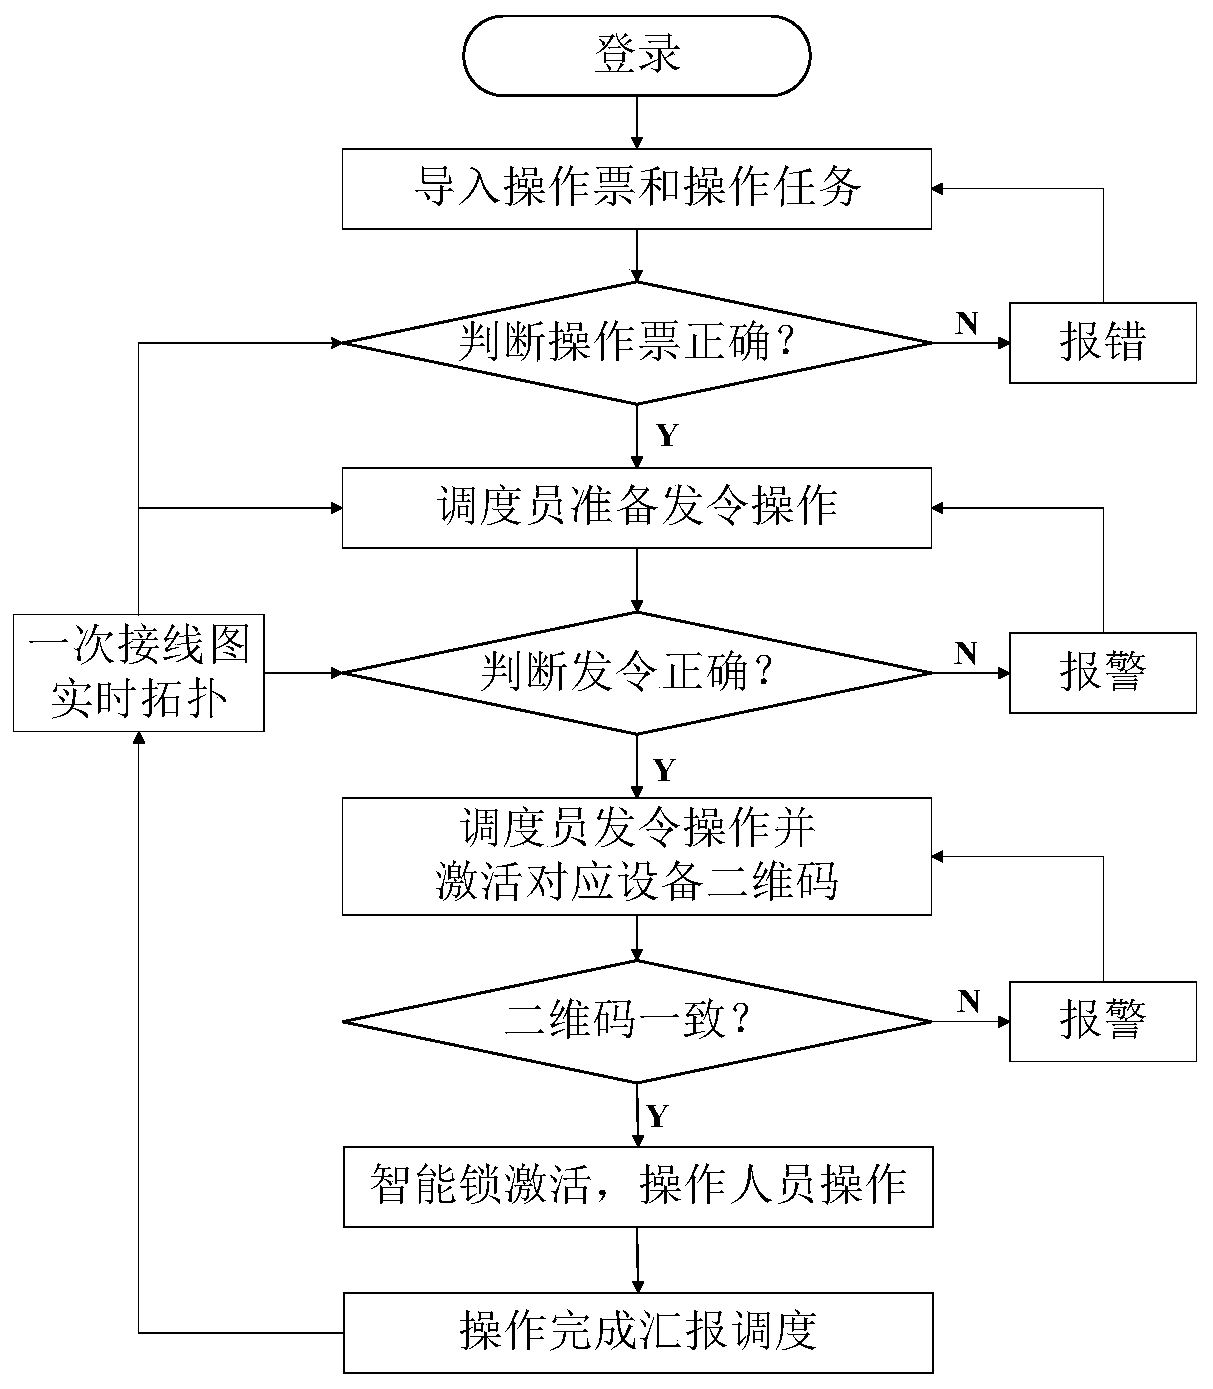 Whole-network whole-process misoperation prevention and lockout method for switching operation